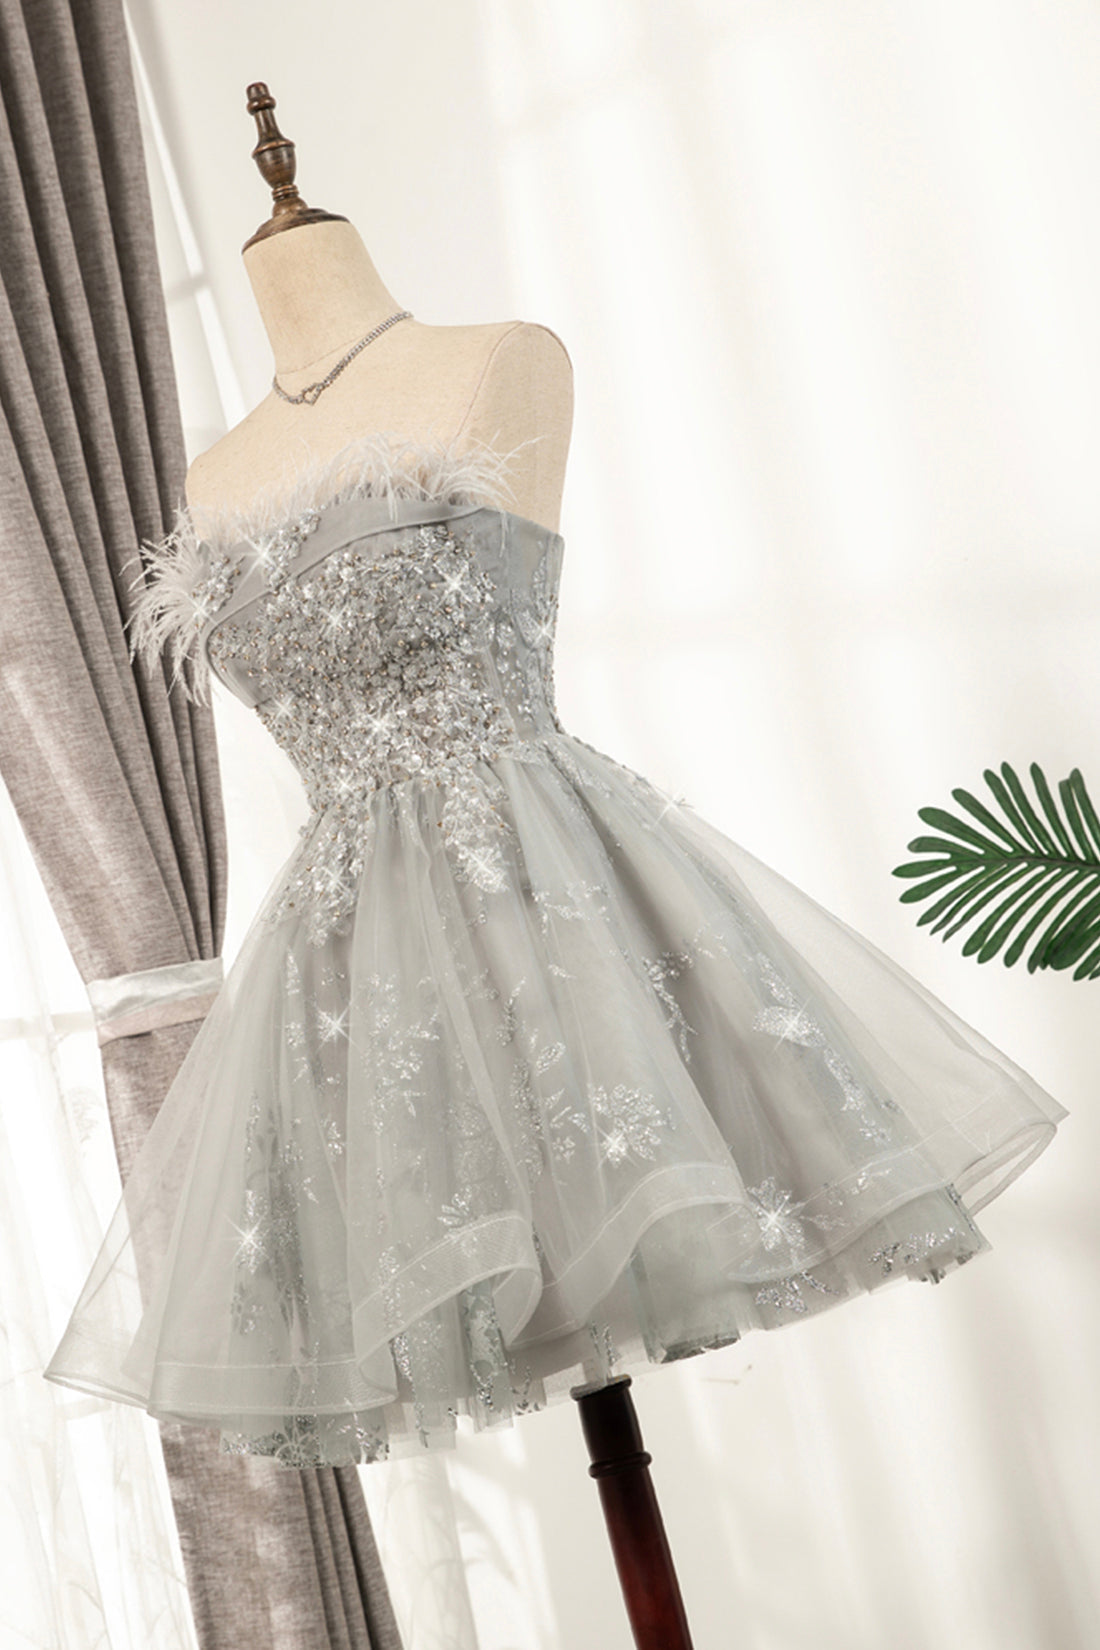 Gray Strapless Tulle Short Corset Prom Dress with Sequins, Cute A-Line Party Dress Outfits, Bridesmaid Dress Green